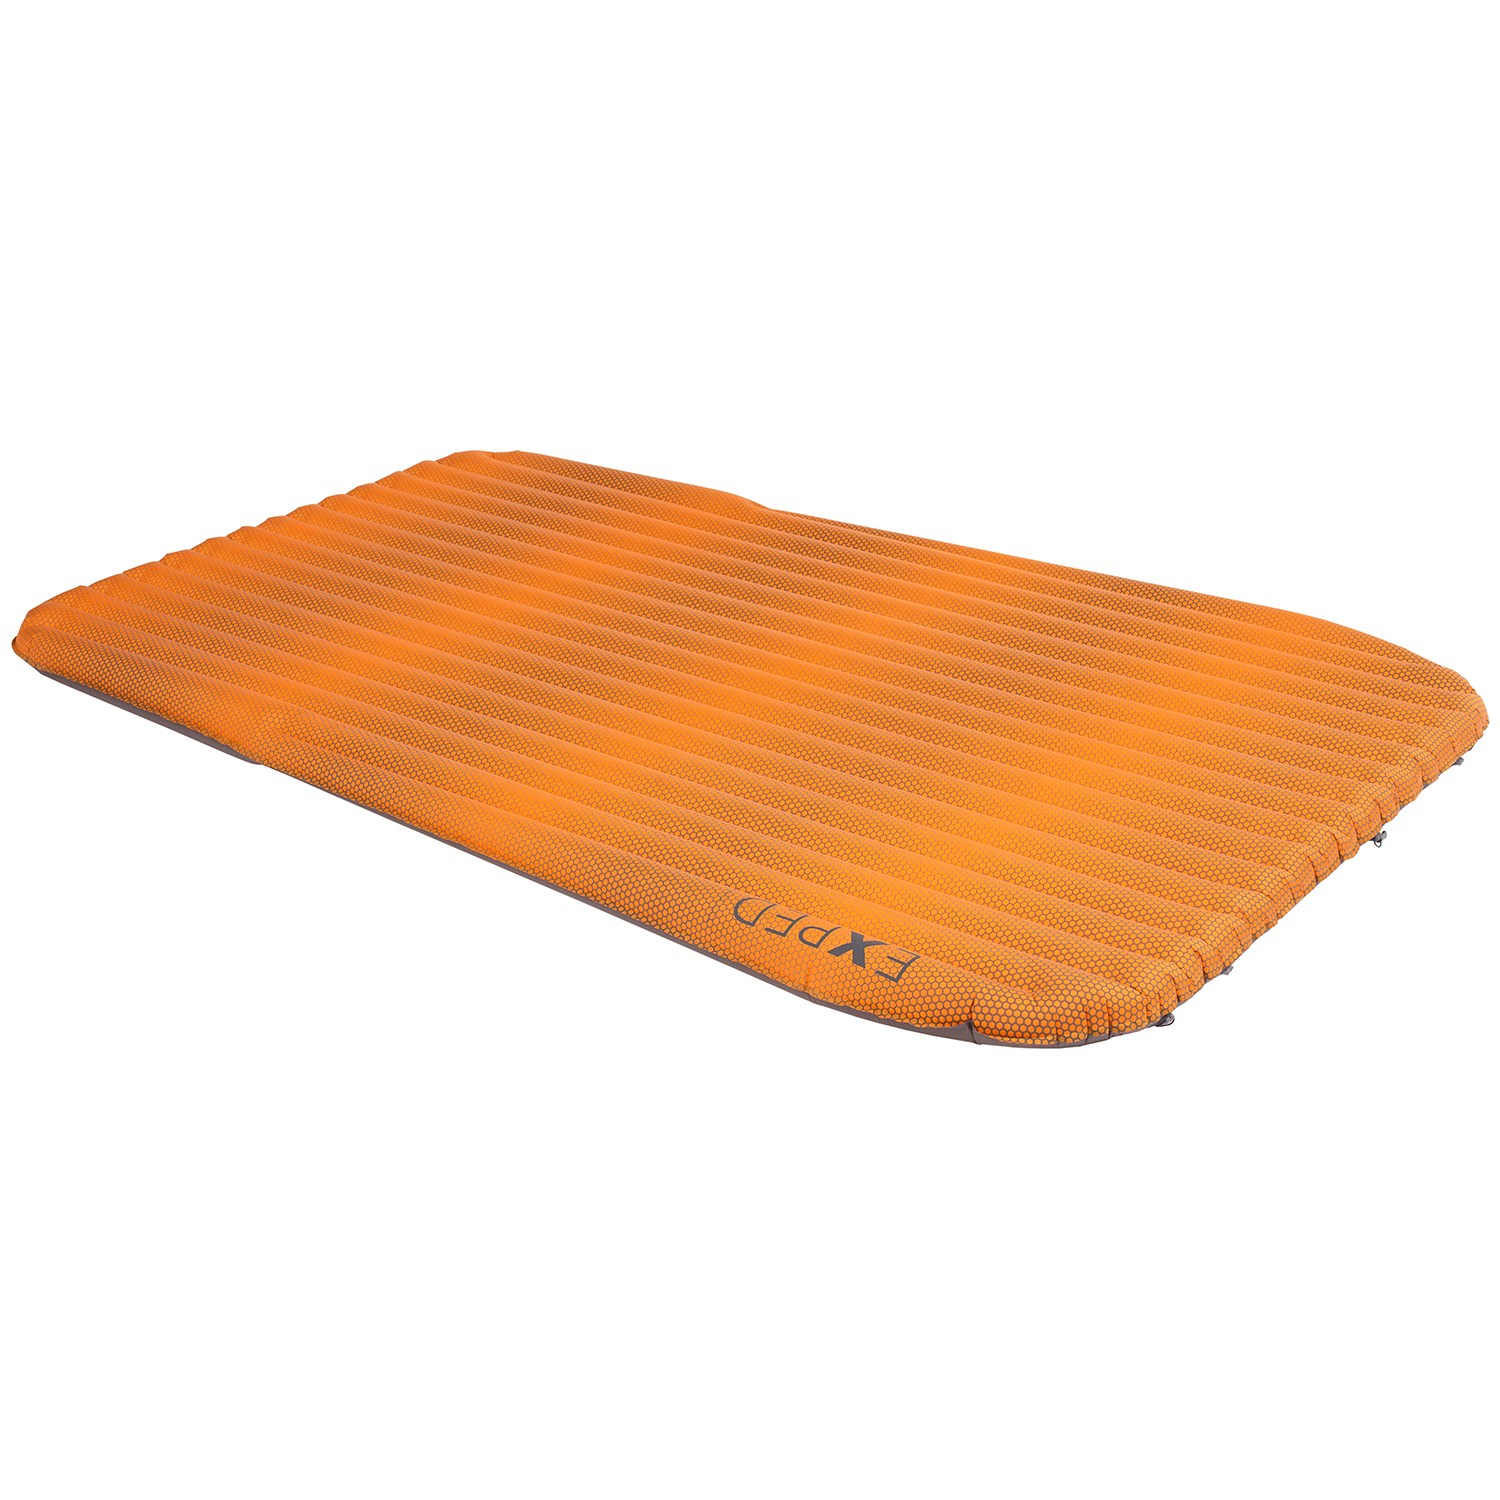 EXPED SynMat HL Duo Sleeping Pad | evo